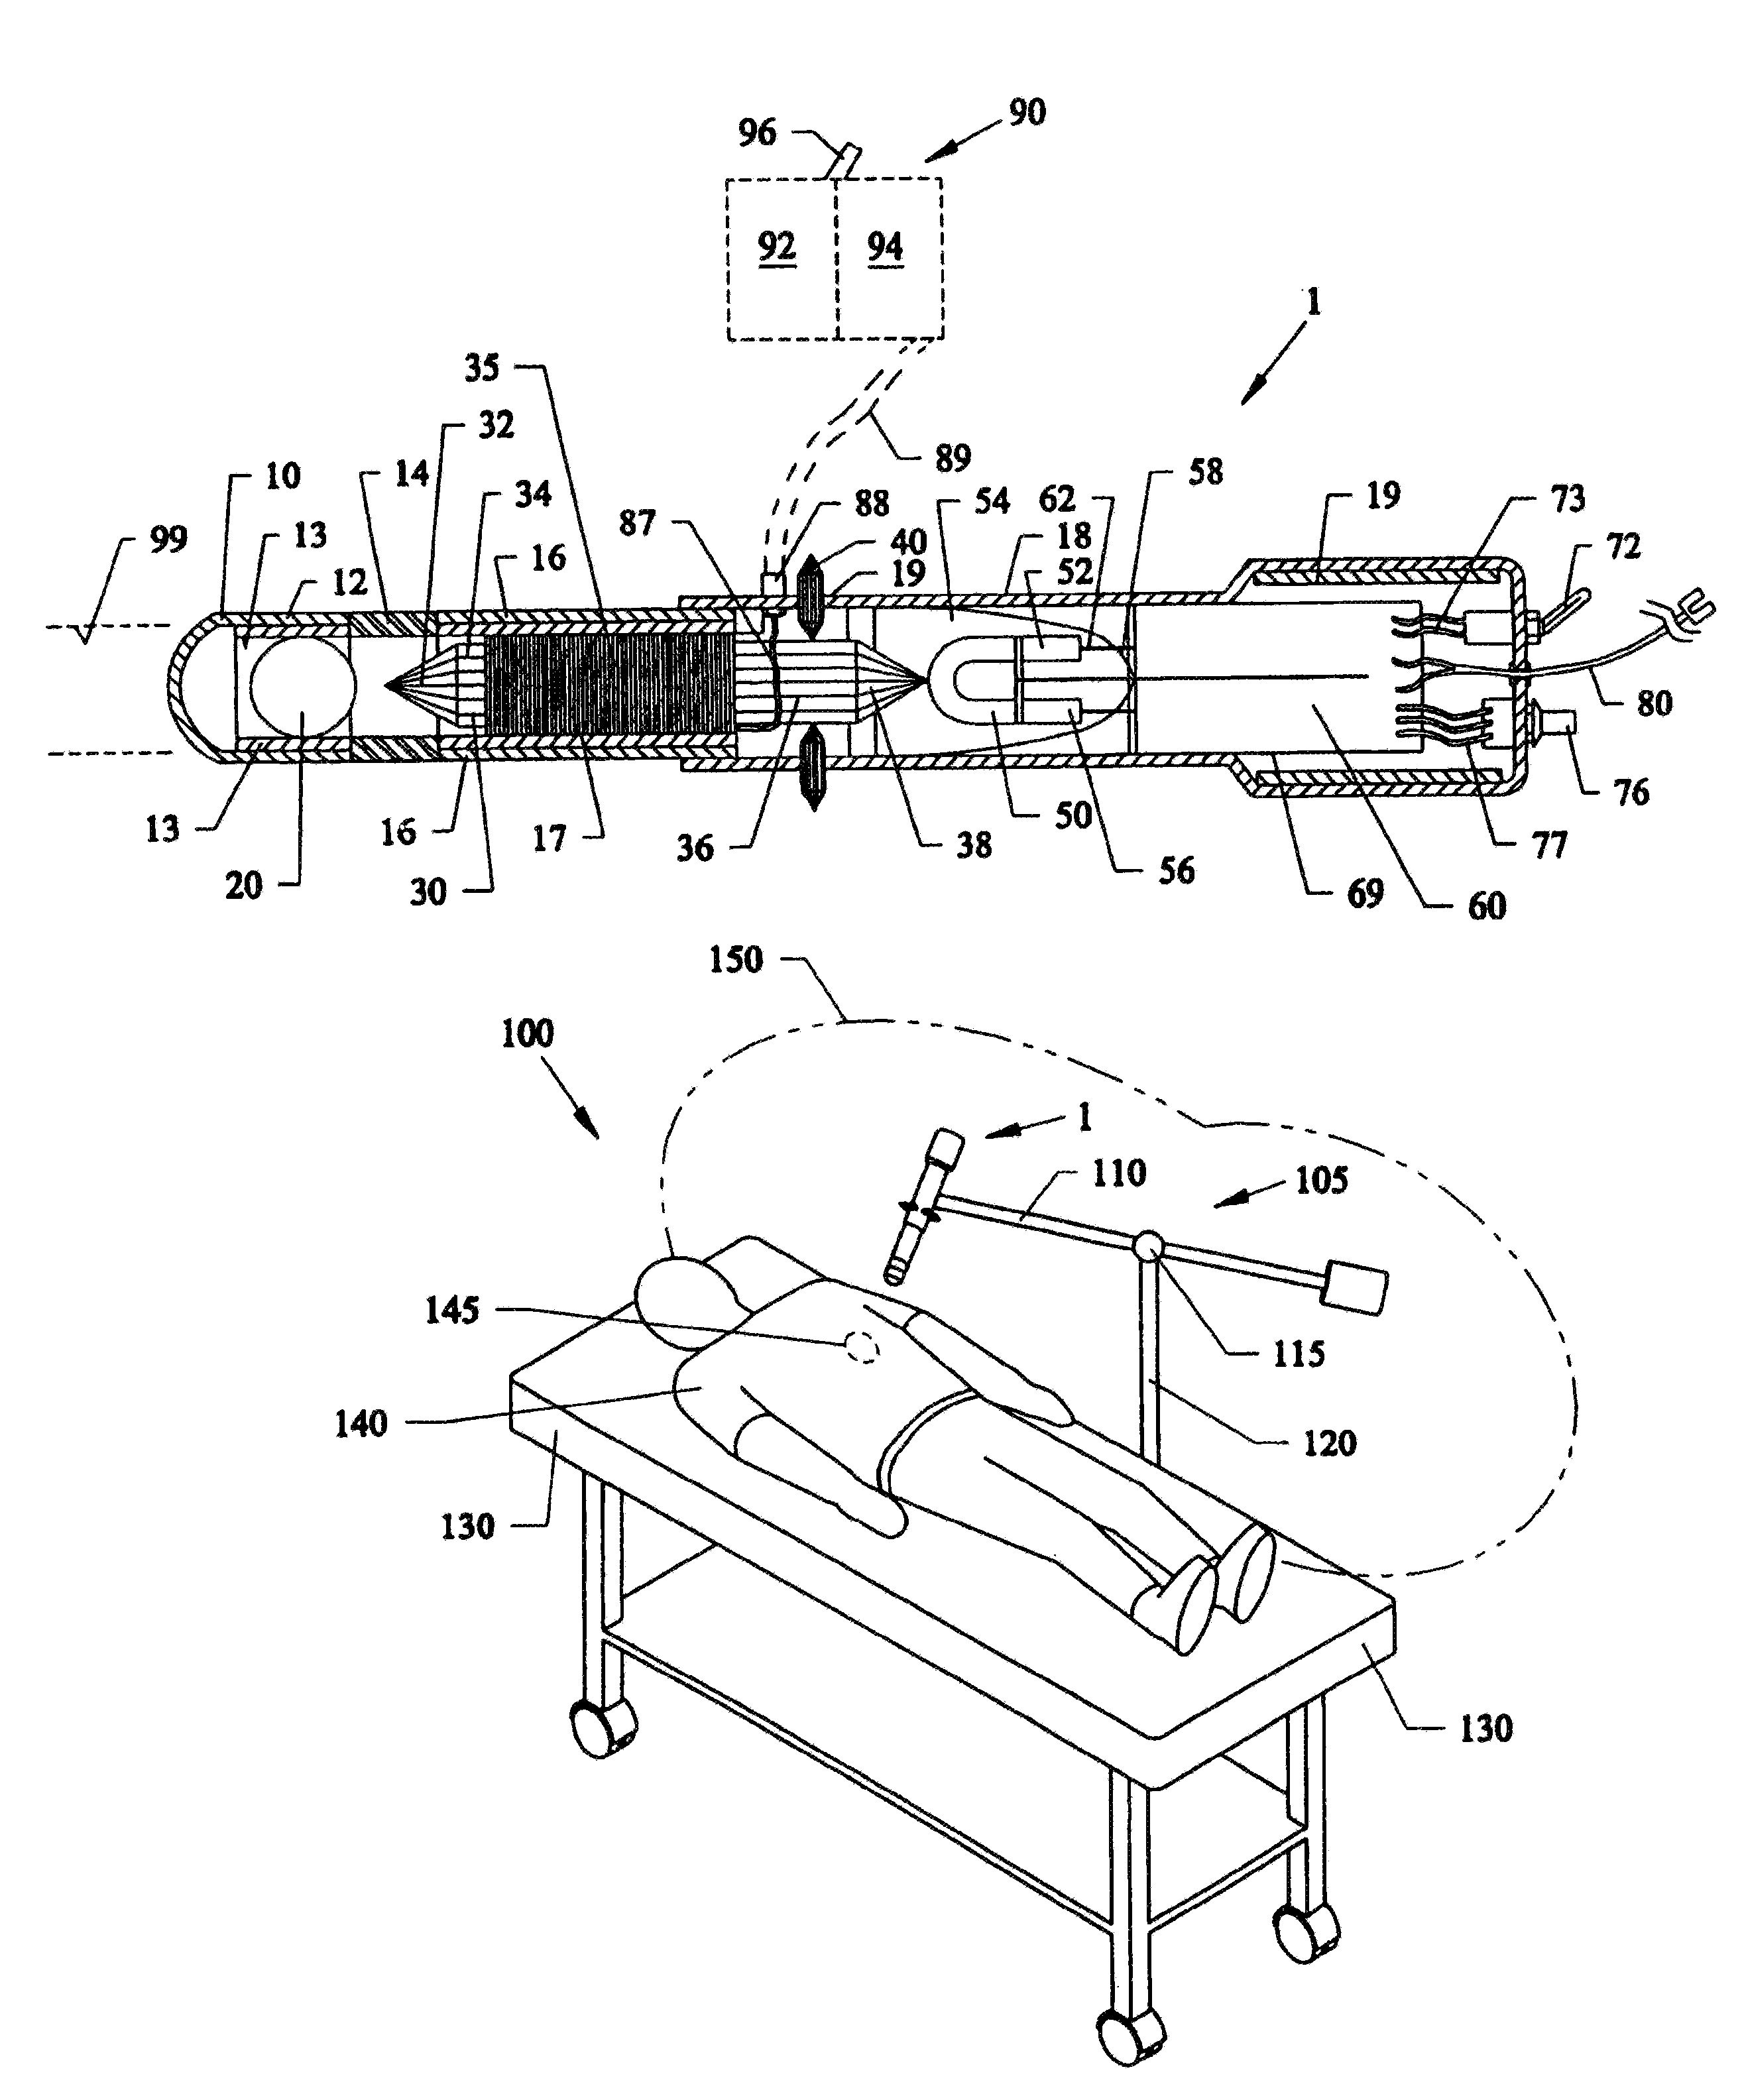 Therapy tools and treatment methods